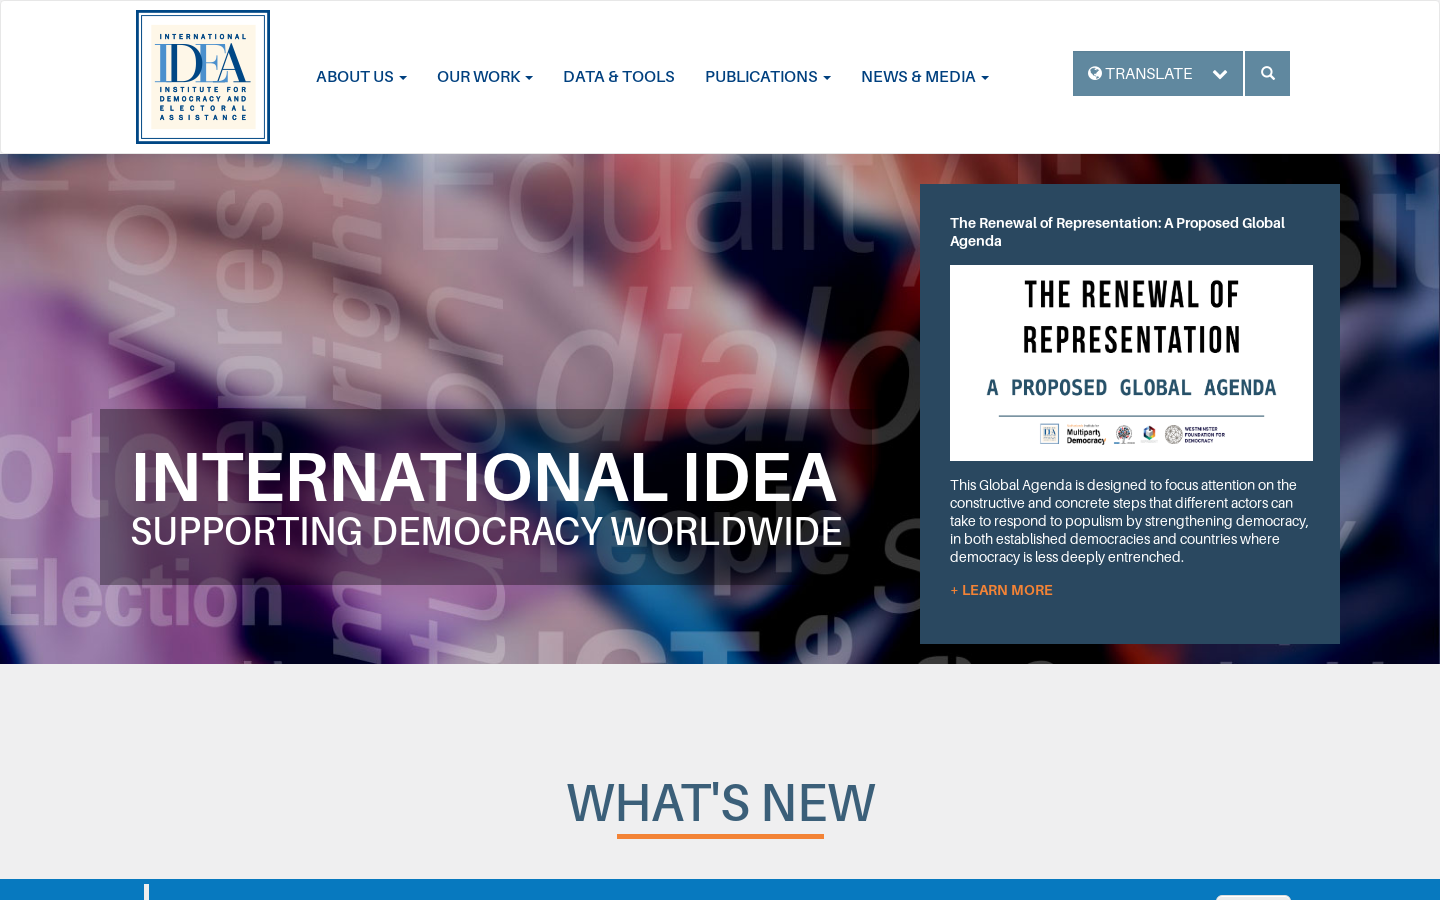 International institute for democracy and electoral assistance jobs